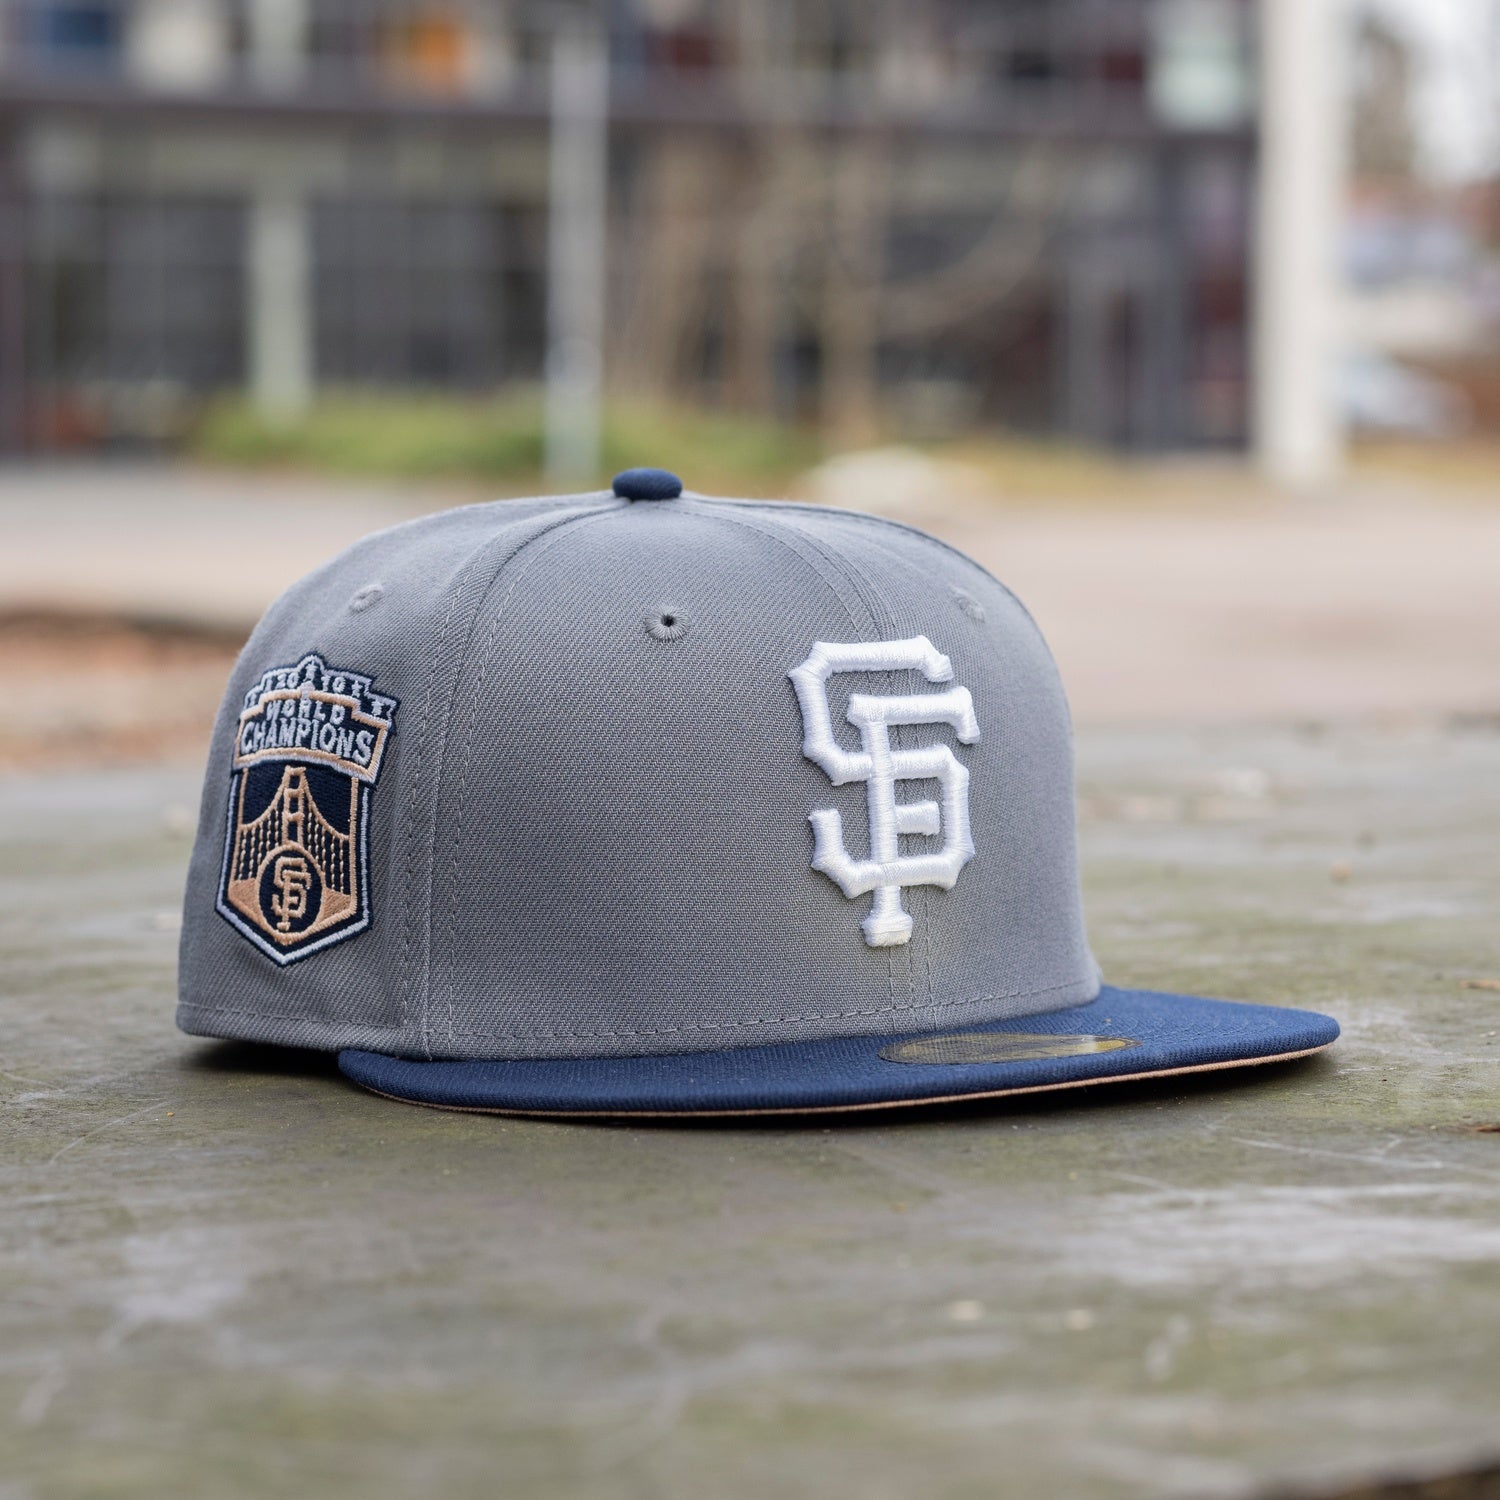 NEW ERA 59FIFTY MLB SAN FRANCISCO GIANTS WORLD CHAMPIONS 2010 TWO TONE / PEACH UV FITTED CAP